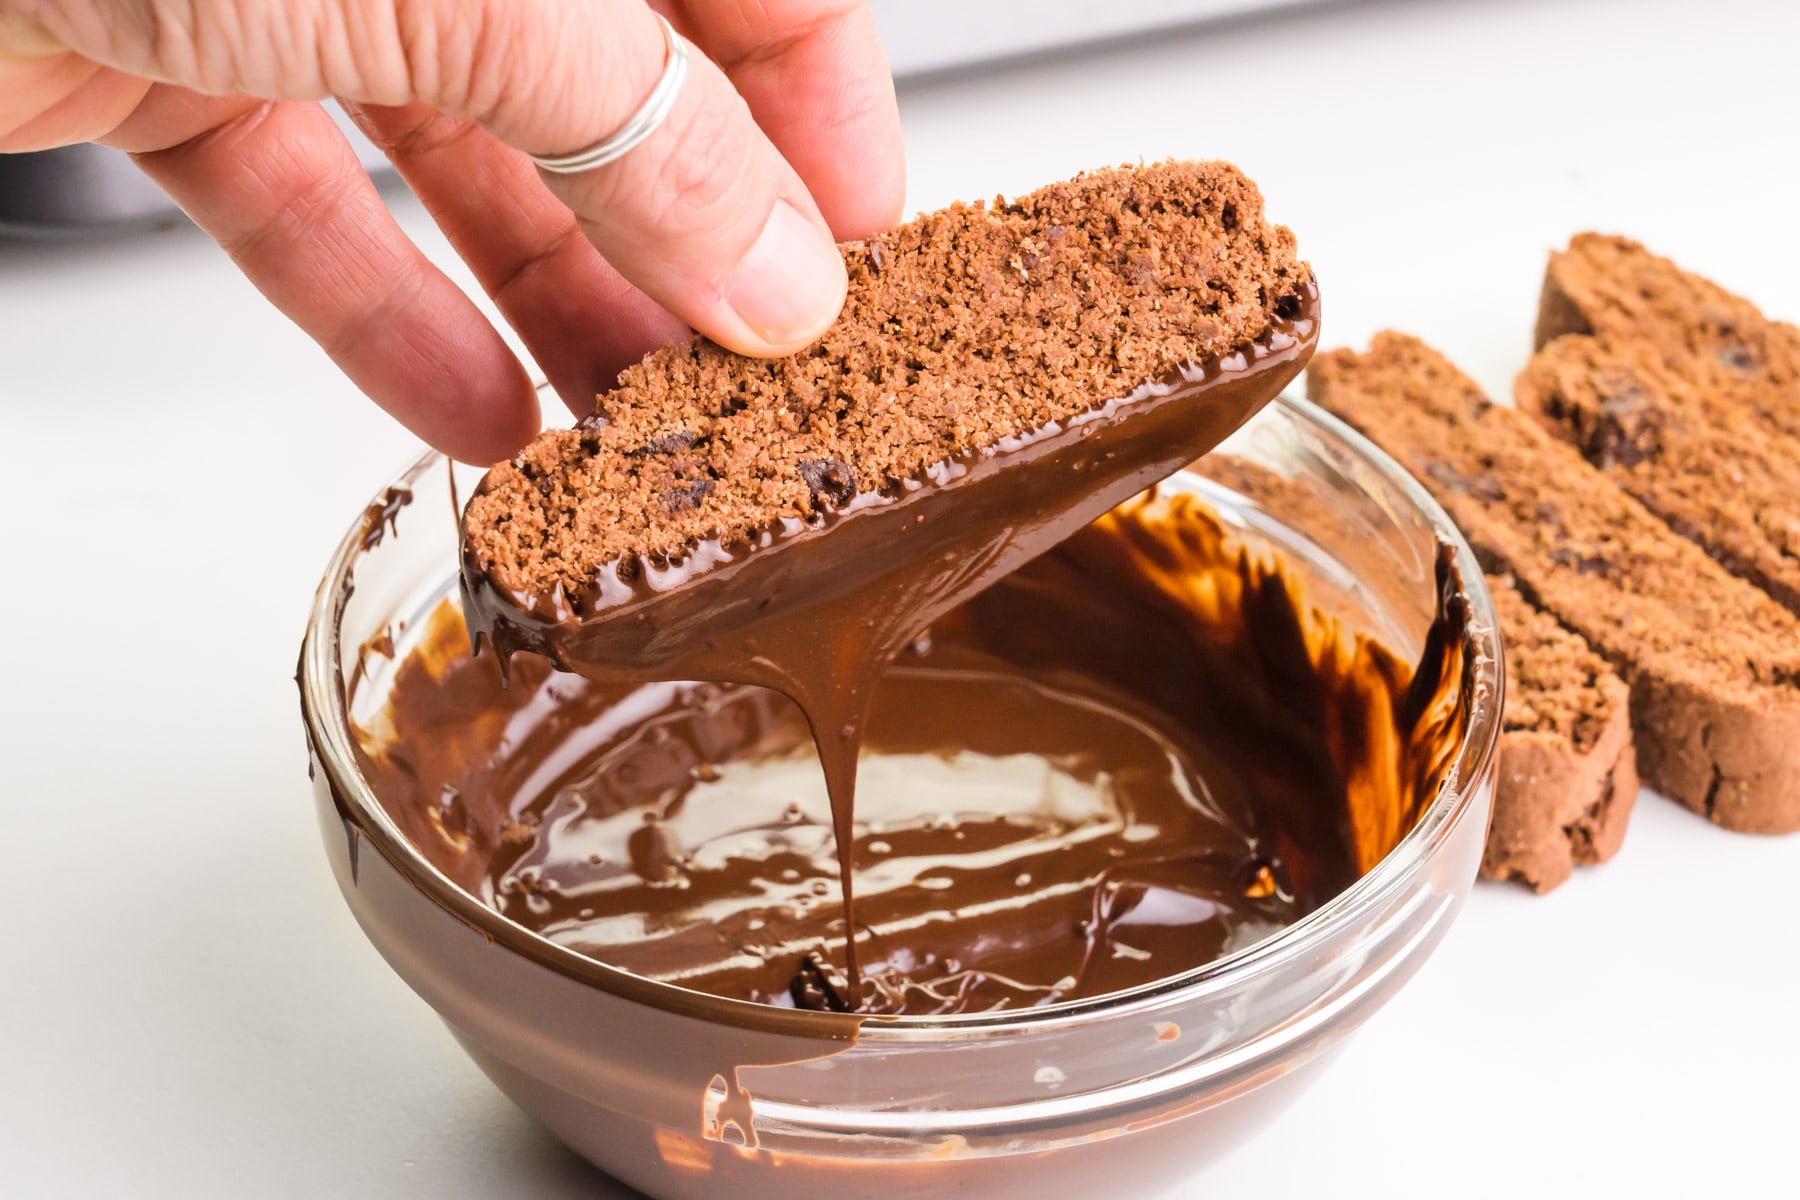 A hand holds a crisp chocolate cookie, dipping it in melted chocolate.